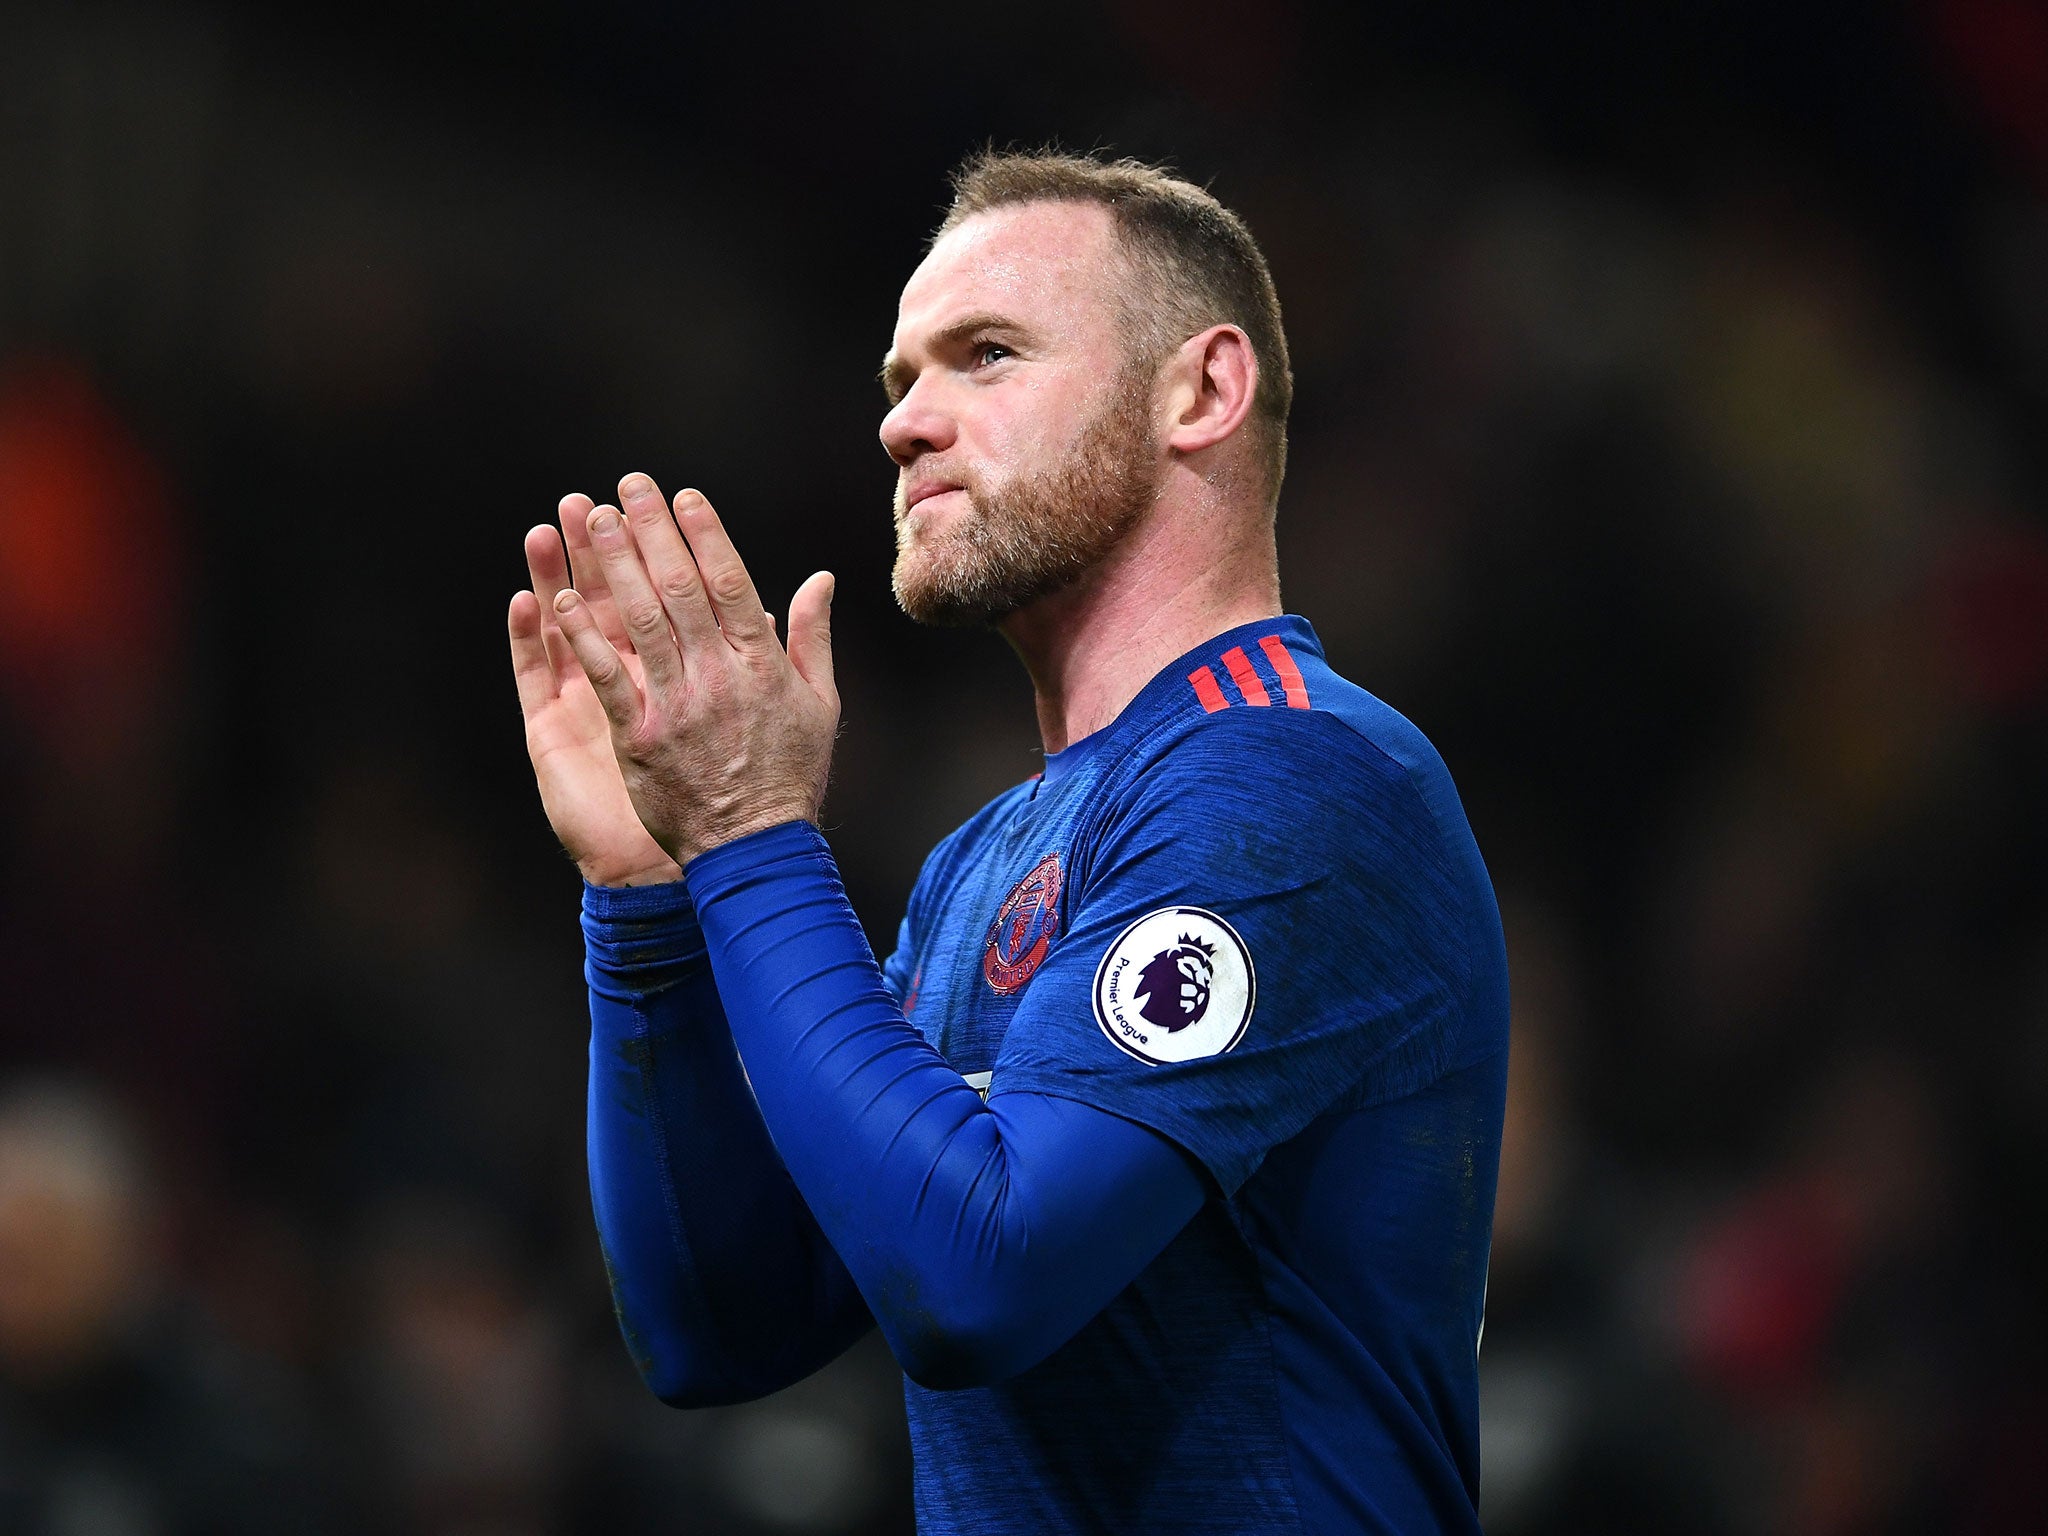 Wayne Rooney is now Manchester United's all-time top goalscorer